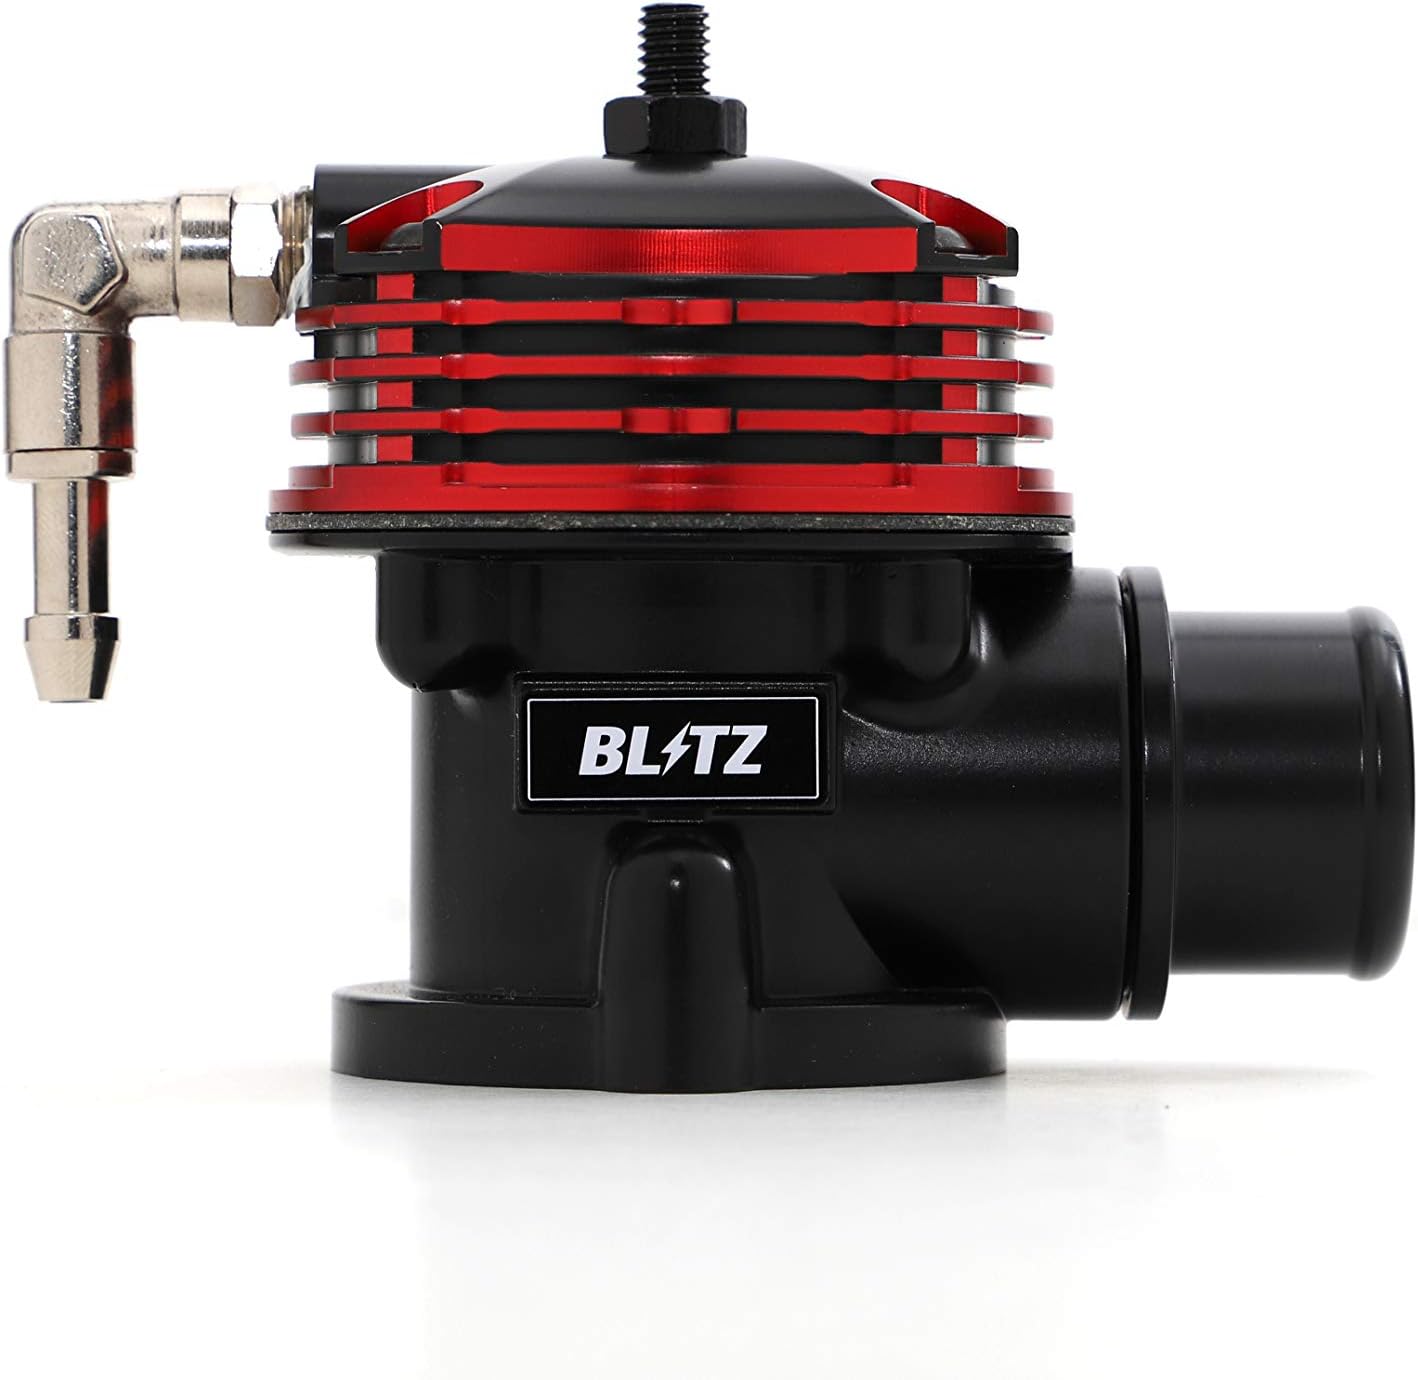 Blitz (Blitz) SUPER SOUND BLOW OFF VALVE BR return type (for vehicle  inspection) GT-R R35 VR38DETT dedicated 70727 Discovery Japan Mall